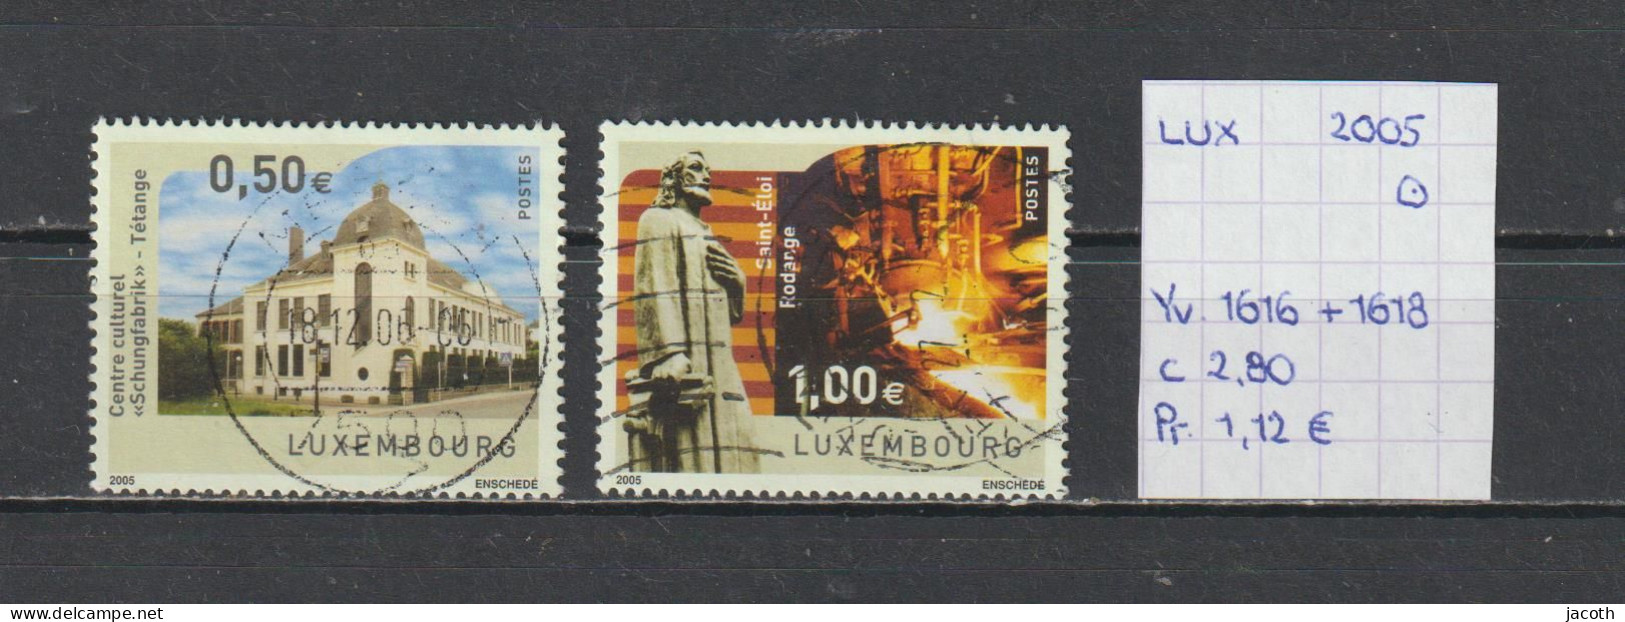 (TJ) Luxembourg 2005 - YT 1616 + 1618 (gest./obl./used) - Usati